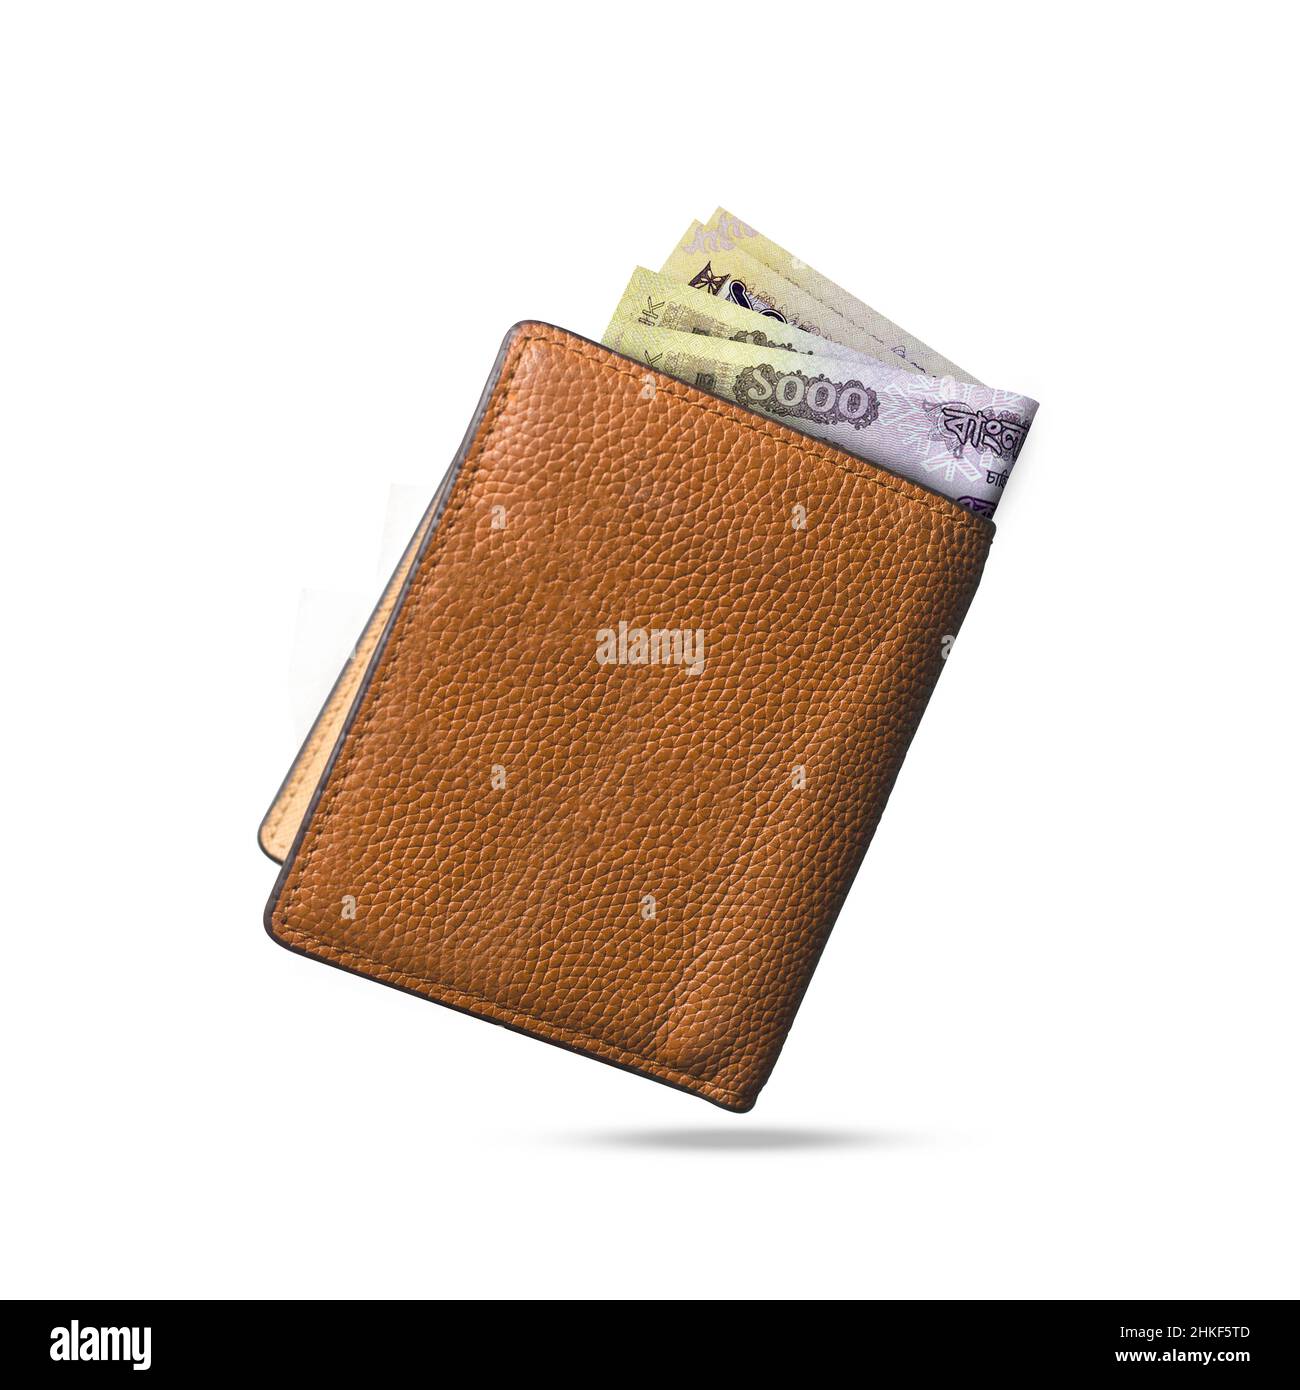 3D rendering of 1000 Bangladeshi Taka notes popping out of a brown leather men’s wallet Stock Photo